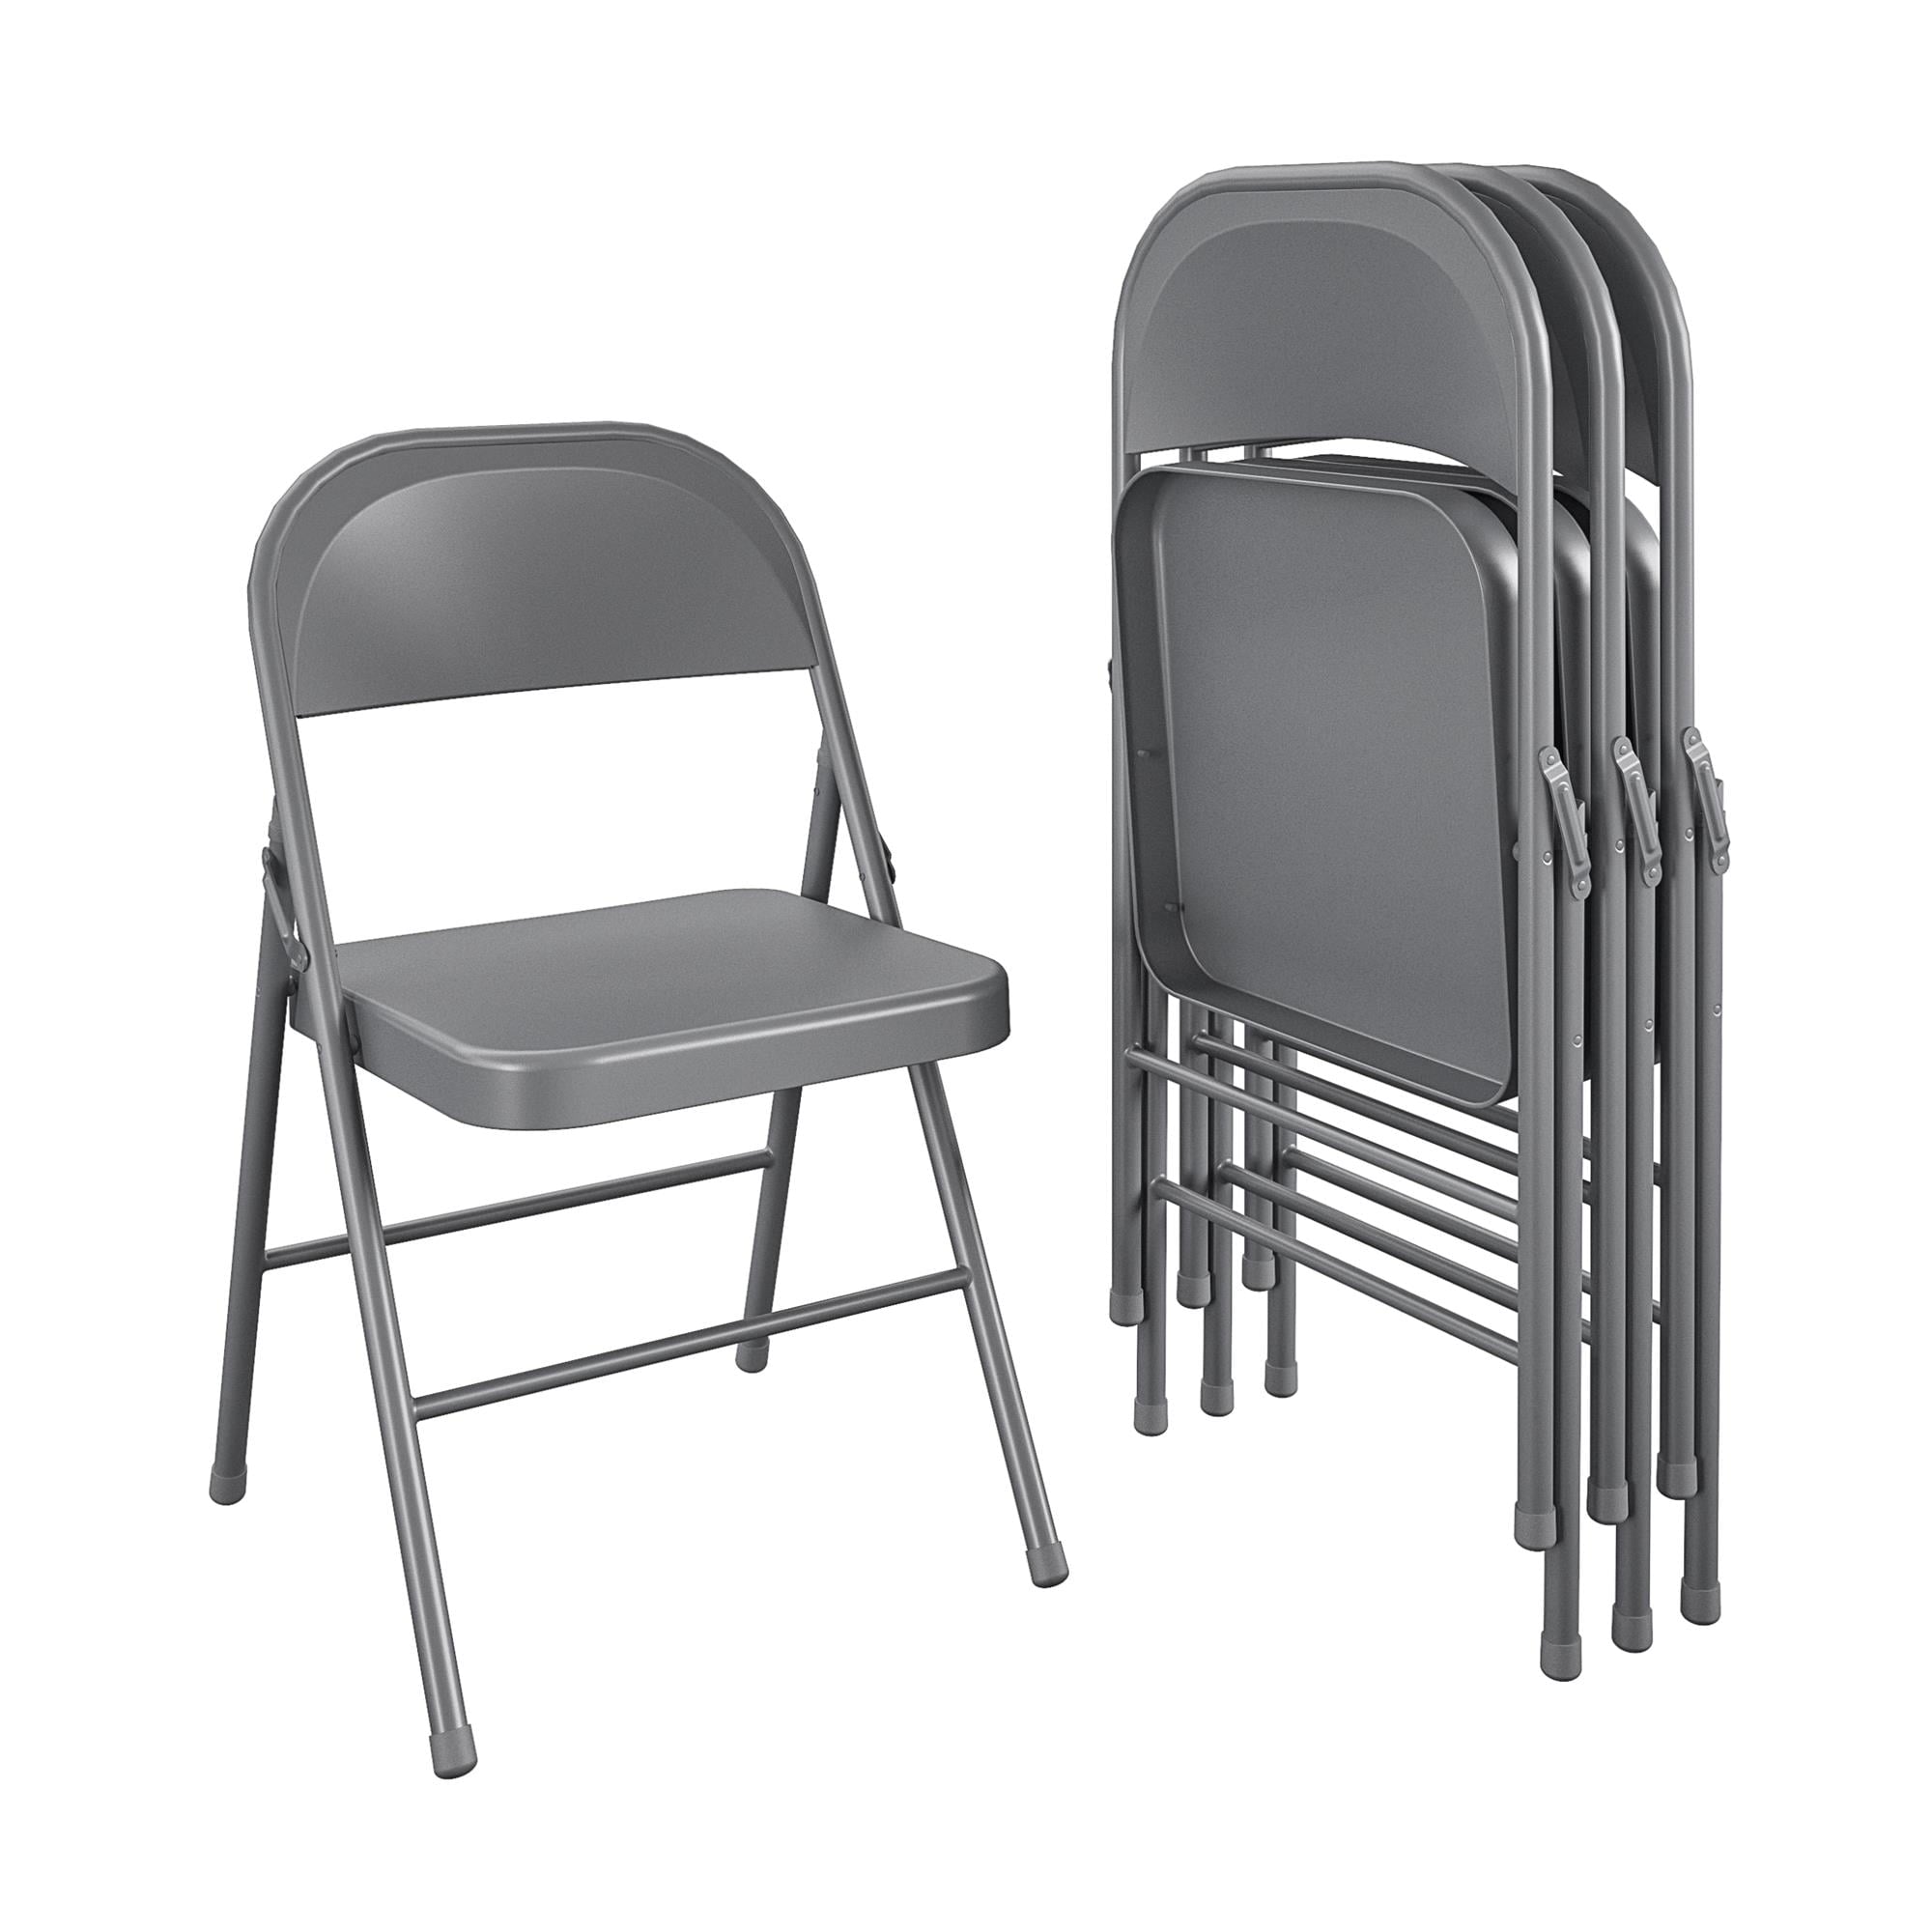 Mainstays Steel Folding Chair In Grey Color